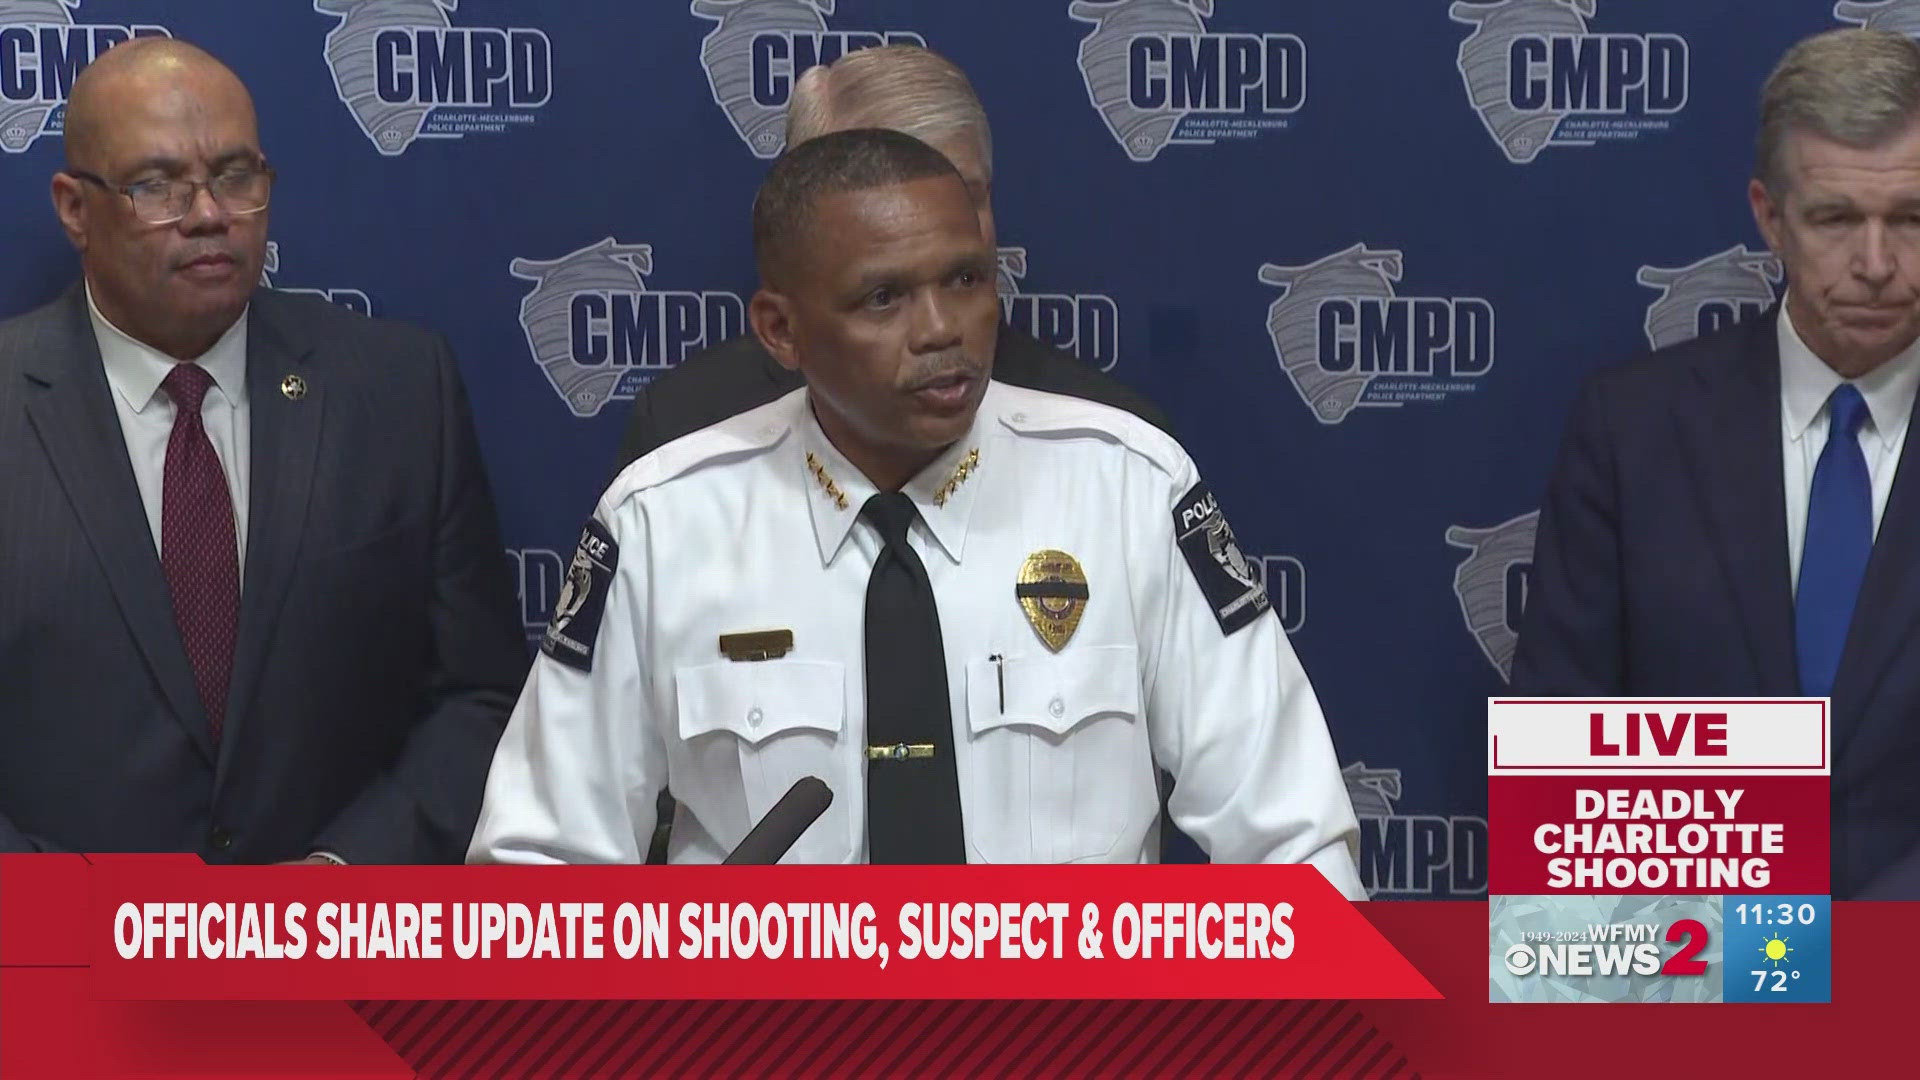 CMPD Chief Johnny Jennings said they haven't ruled out the possibility of a second shooter, but right now, they've only identified one suspect.